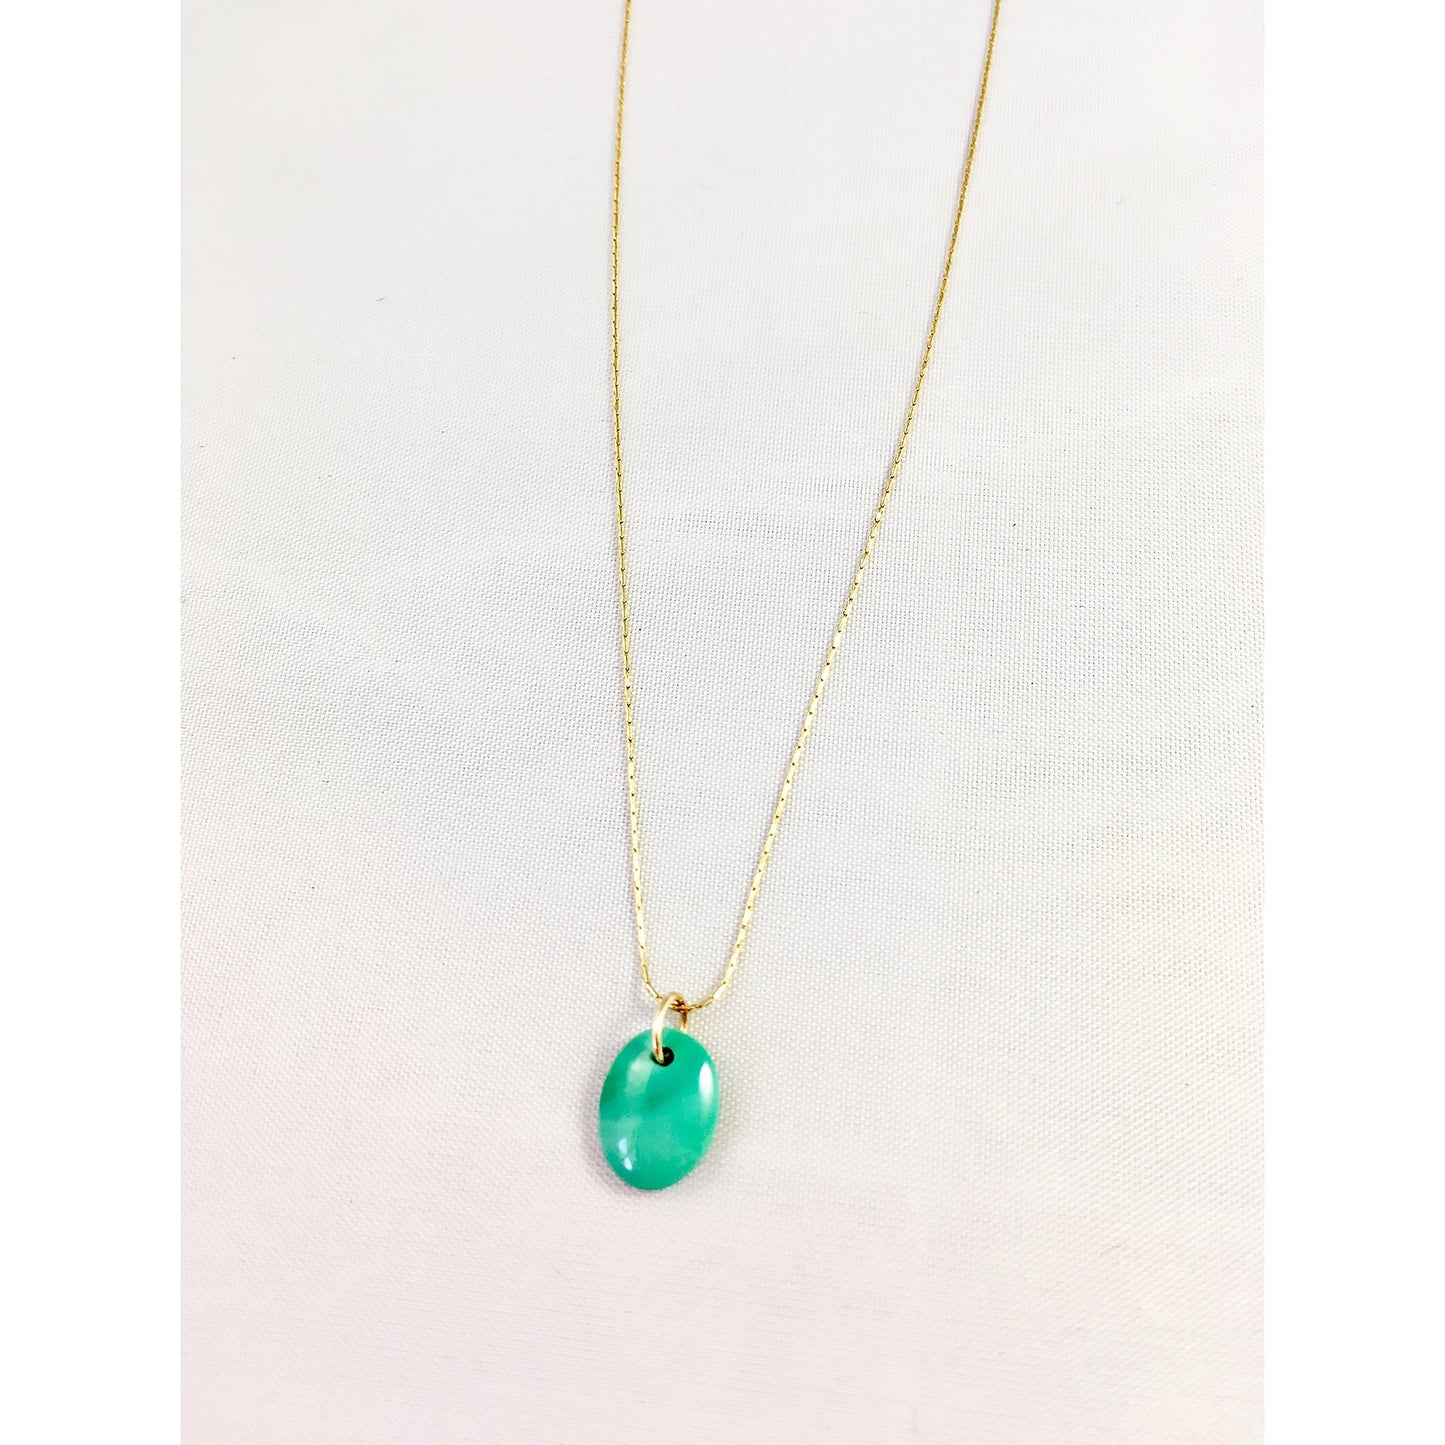 TURQUOISE GOLD NECKLACE - Danielle Morgan 